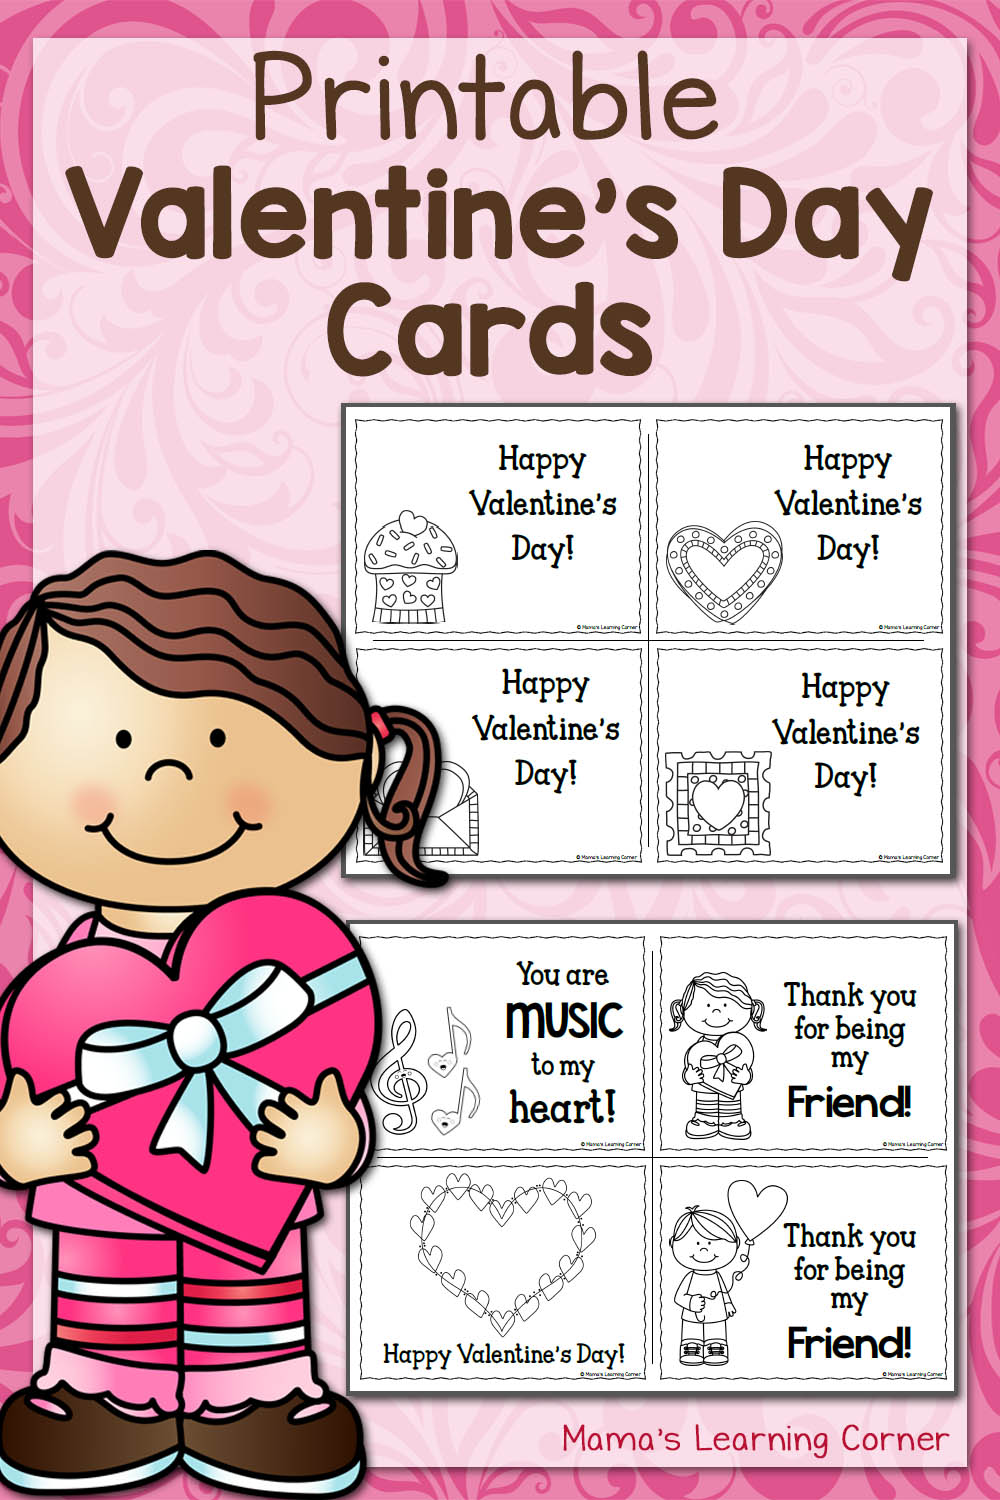 Printable Valentine's Day Cards - Mamas Learning Corner